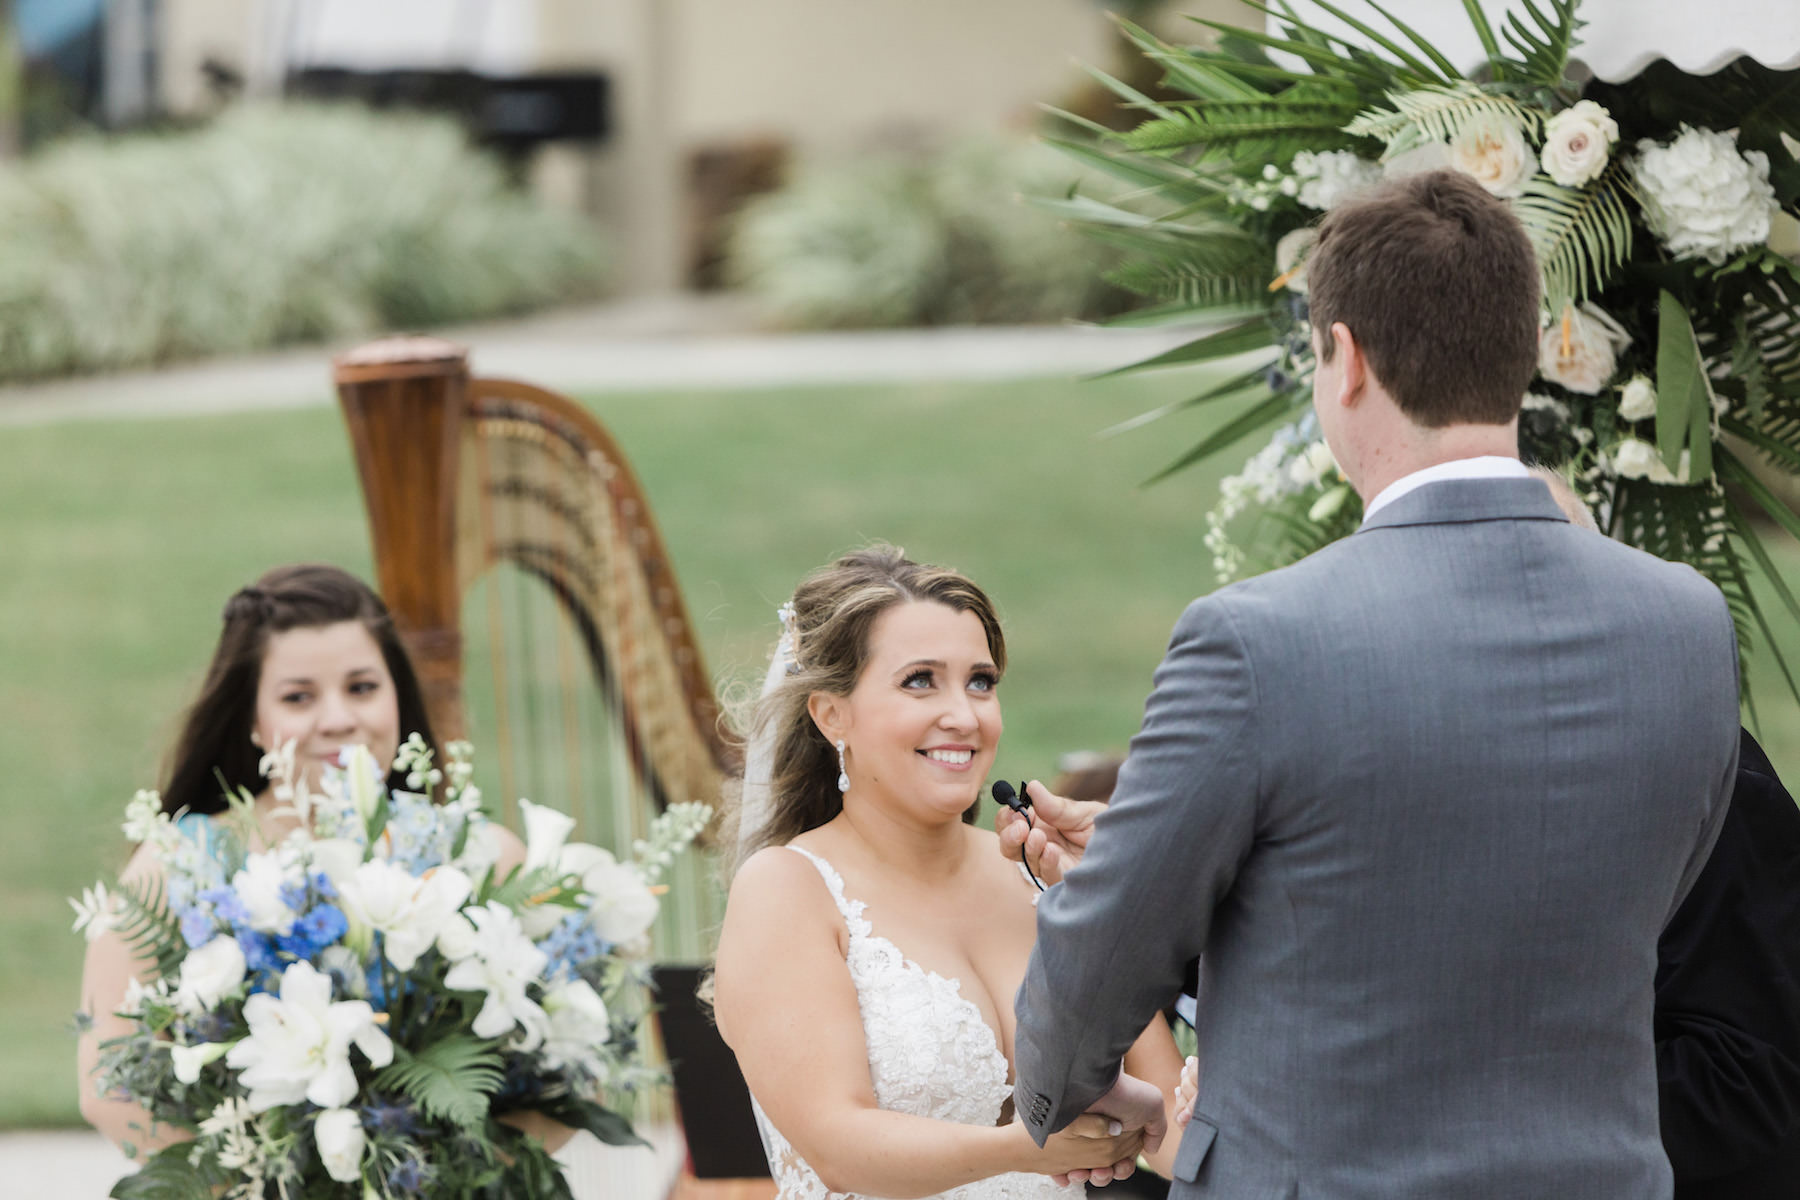 Bride and Groom Exchanging Vows during Outdoor Beach Ceremony at St. Pete Wedding Venue Isla Del Sol | Tropical White and Blue Floral Arrangements with Greenery